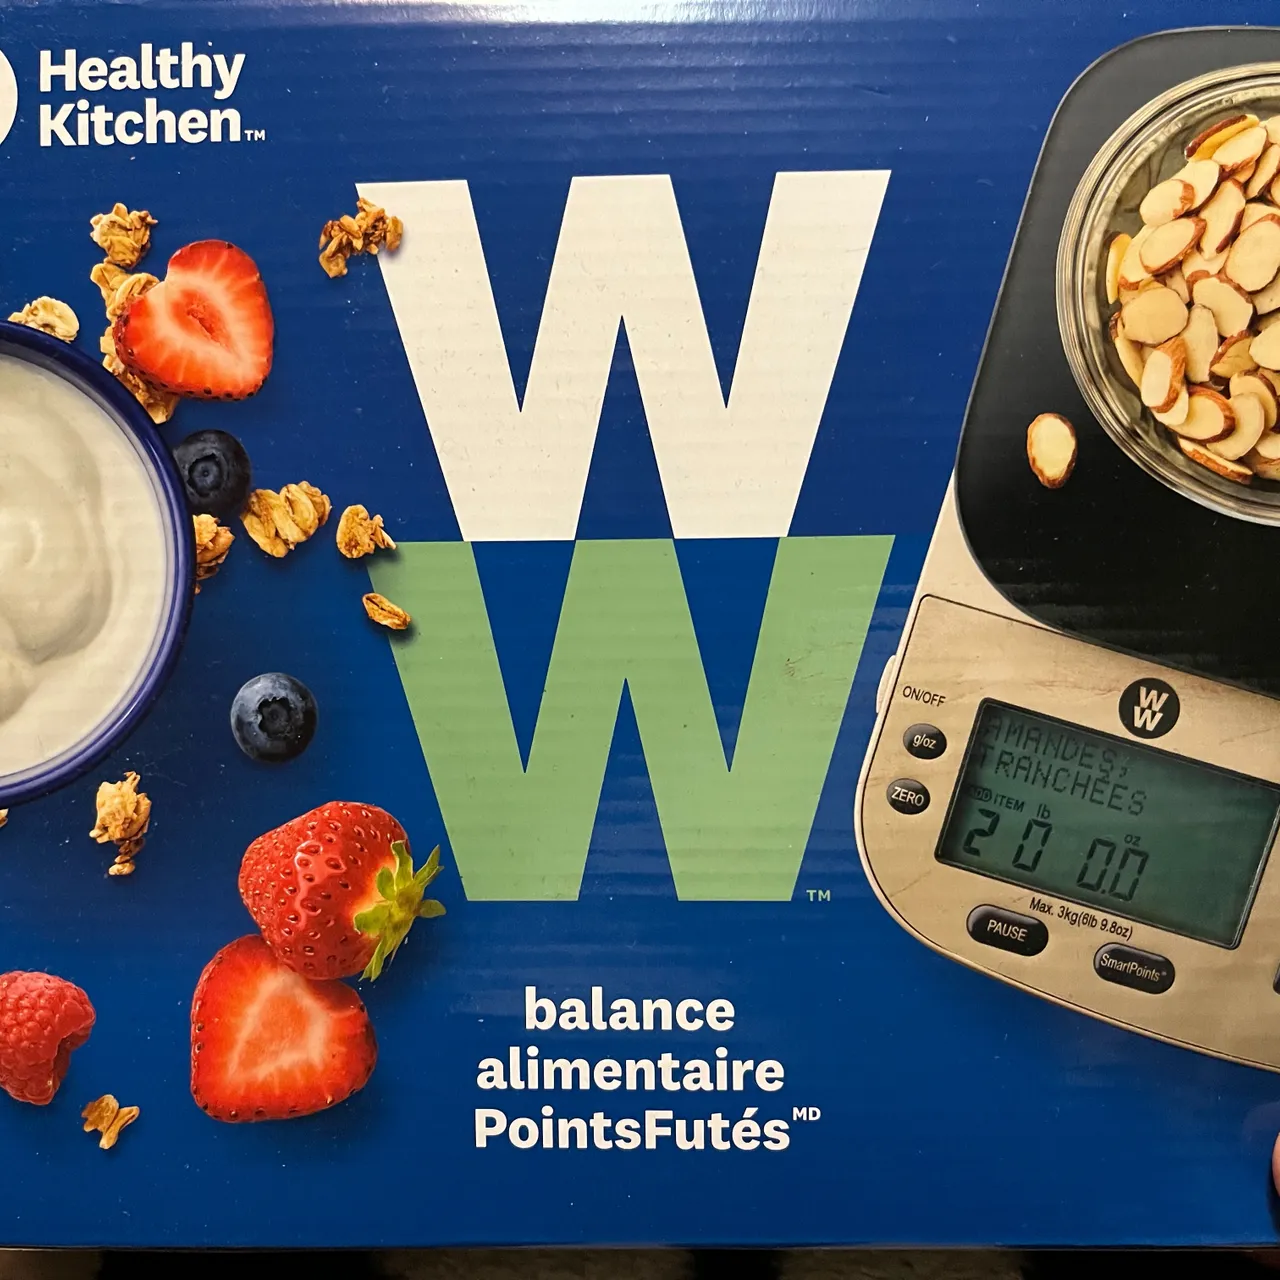 Weight Watchers scale photo 1